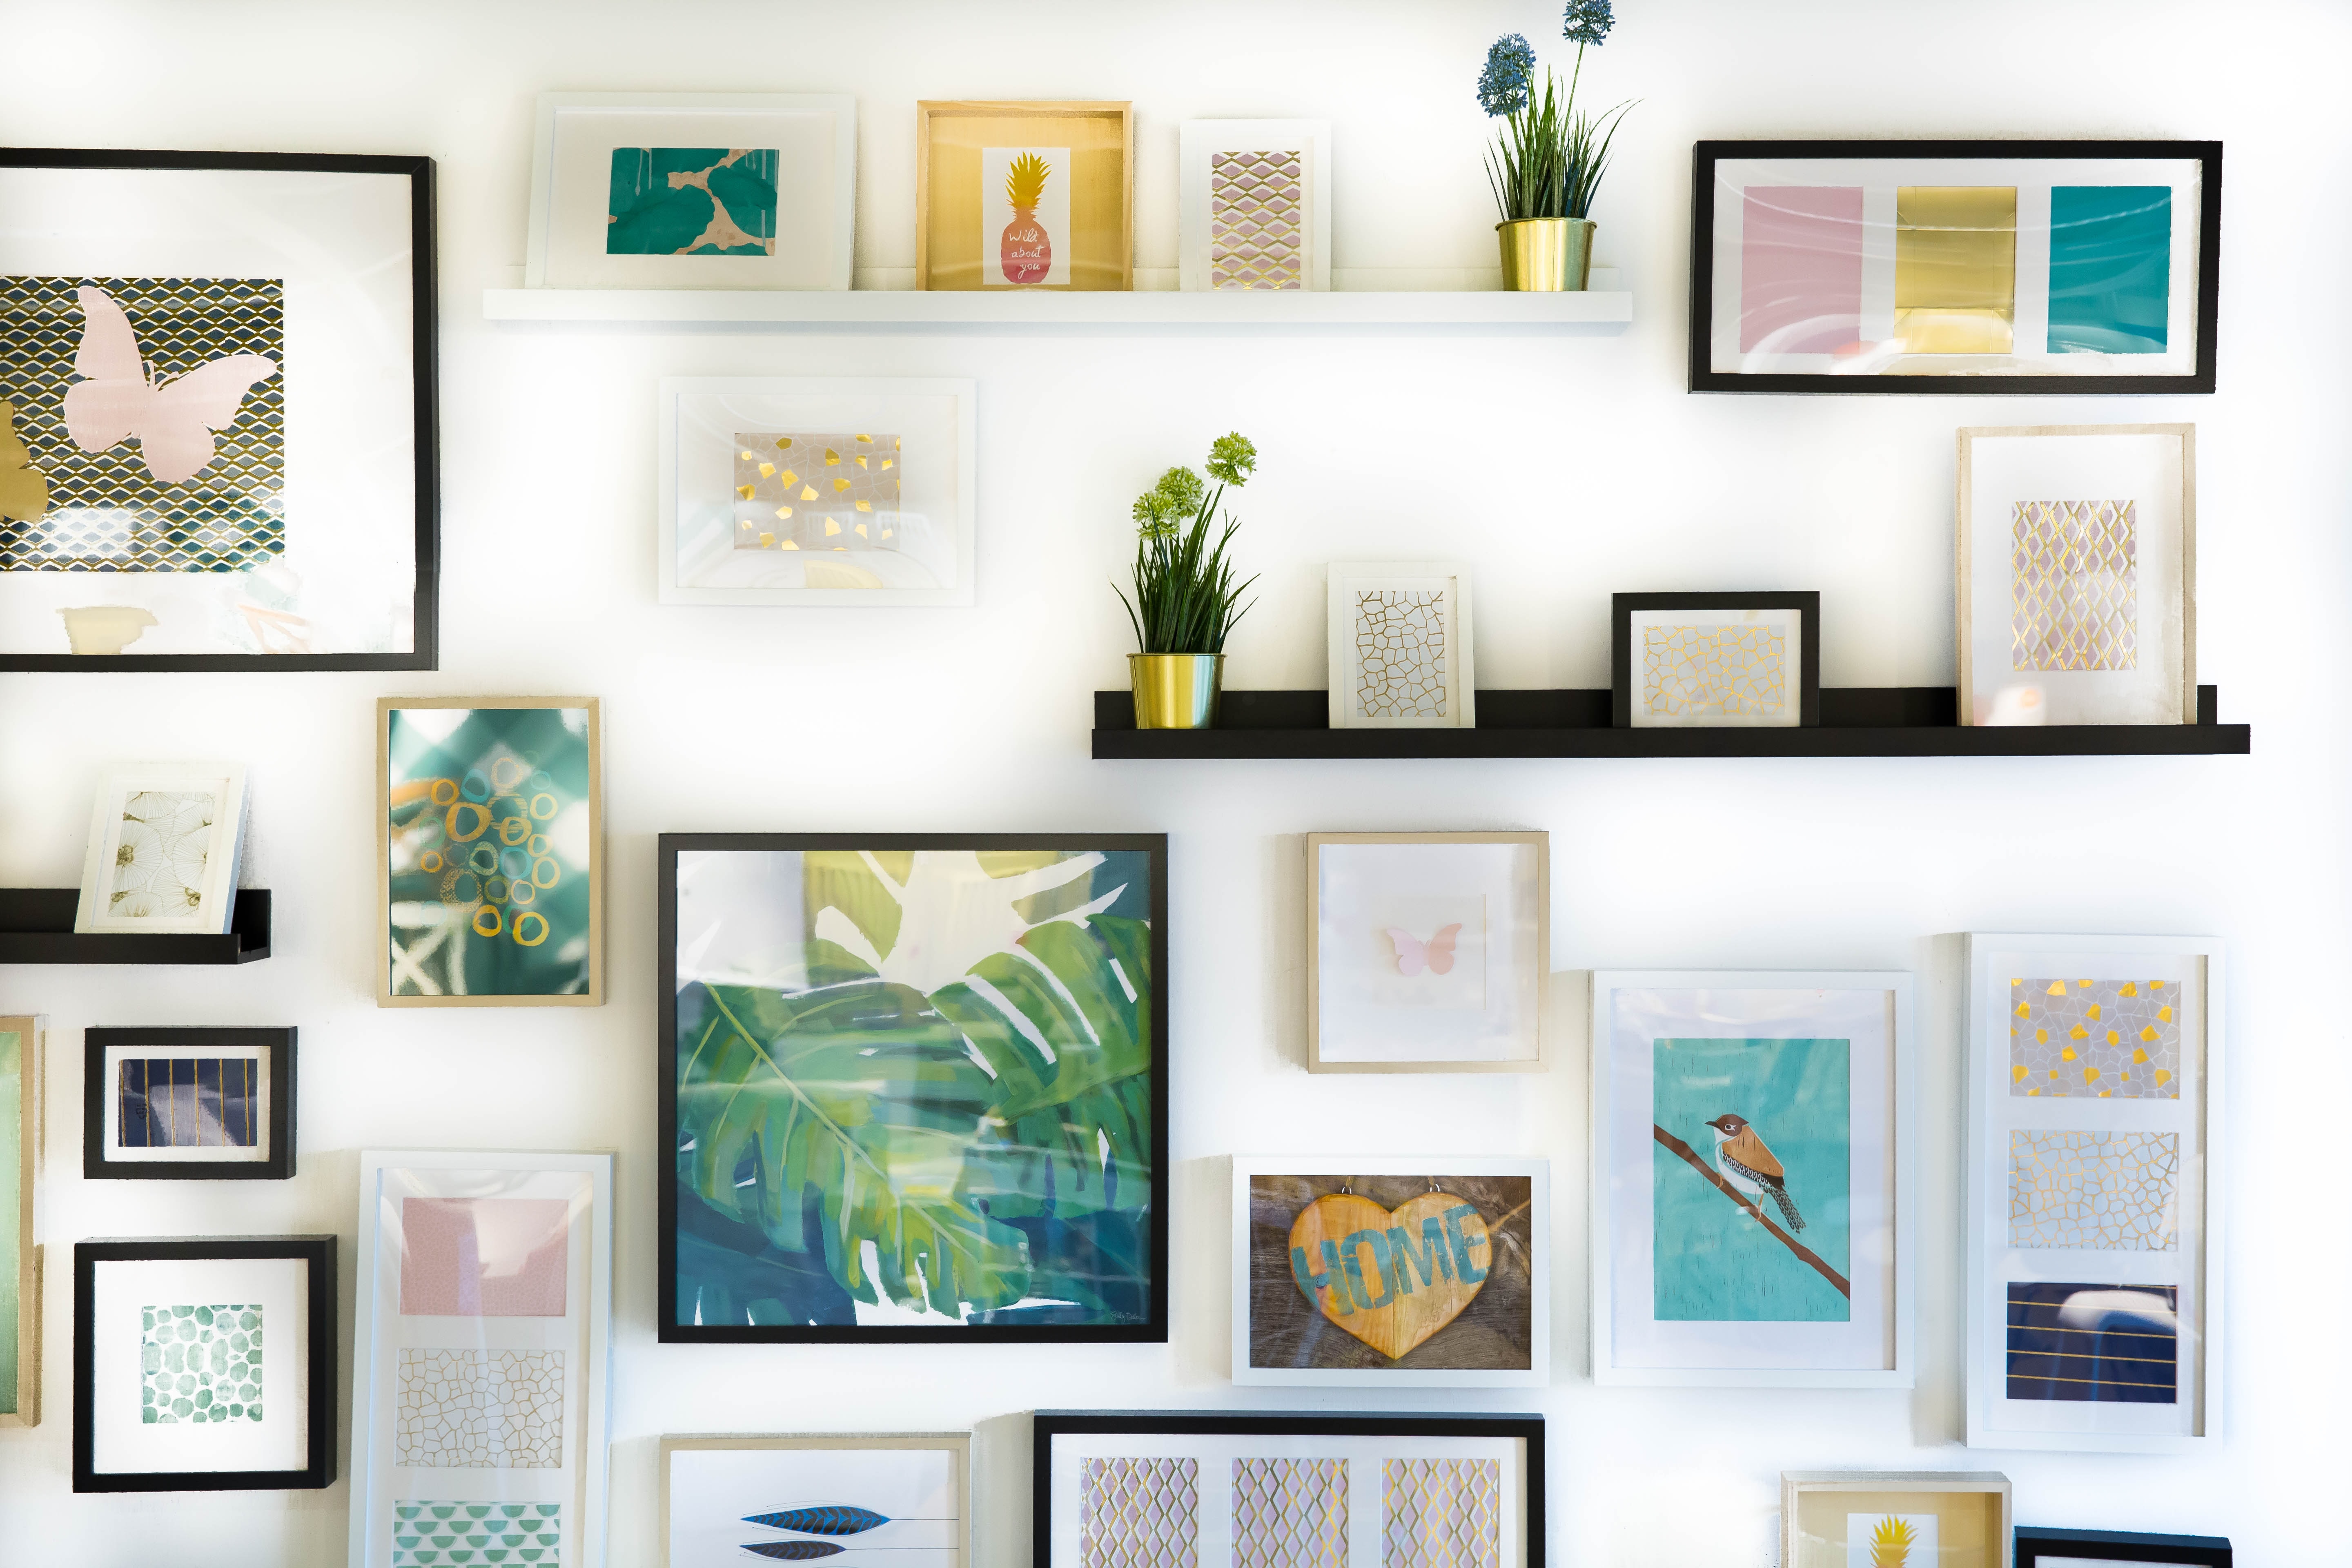 According to Designers, These 6 Items Should Always Be In Your Home!